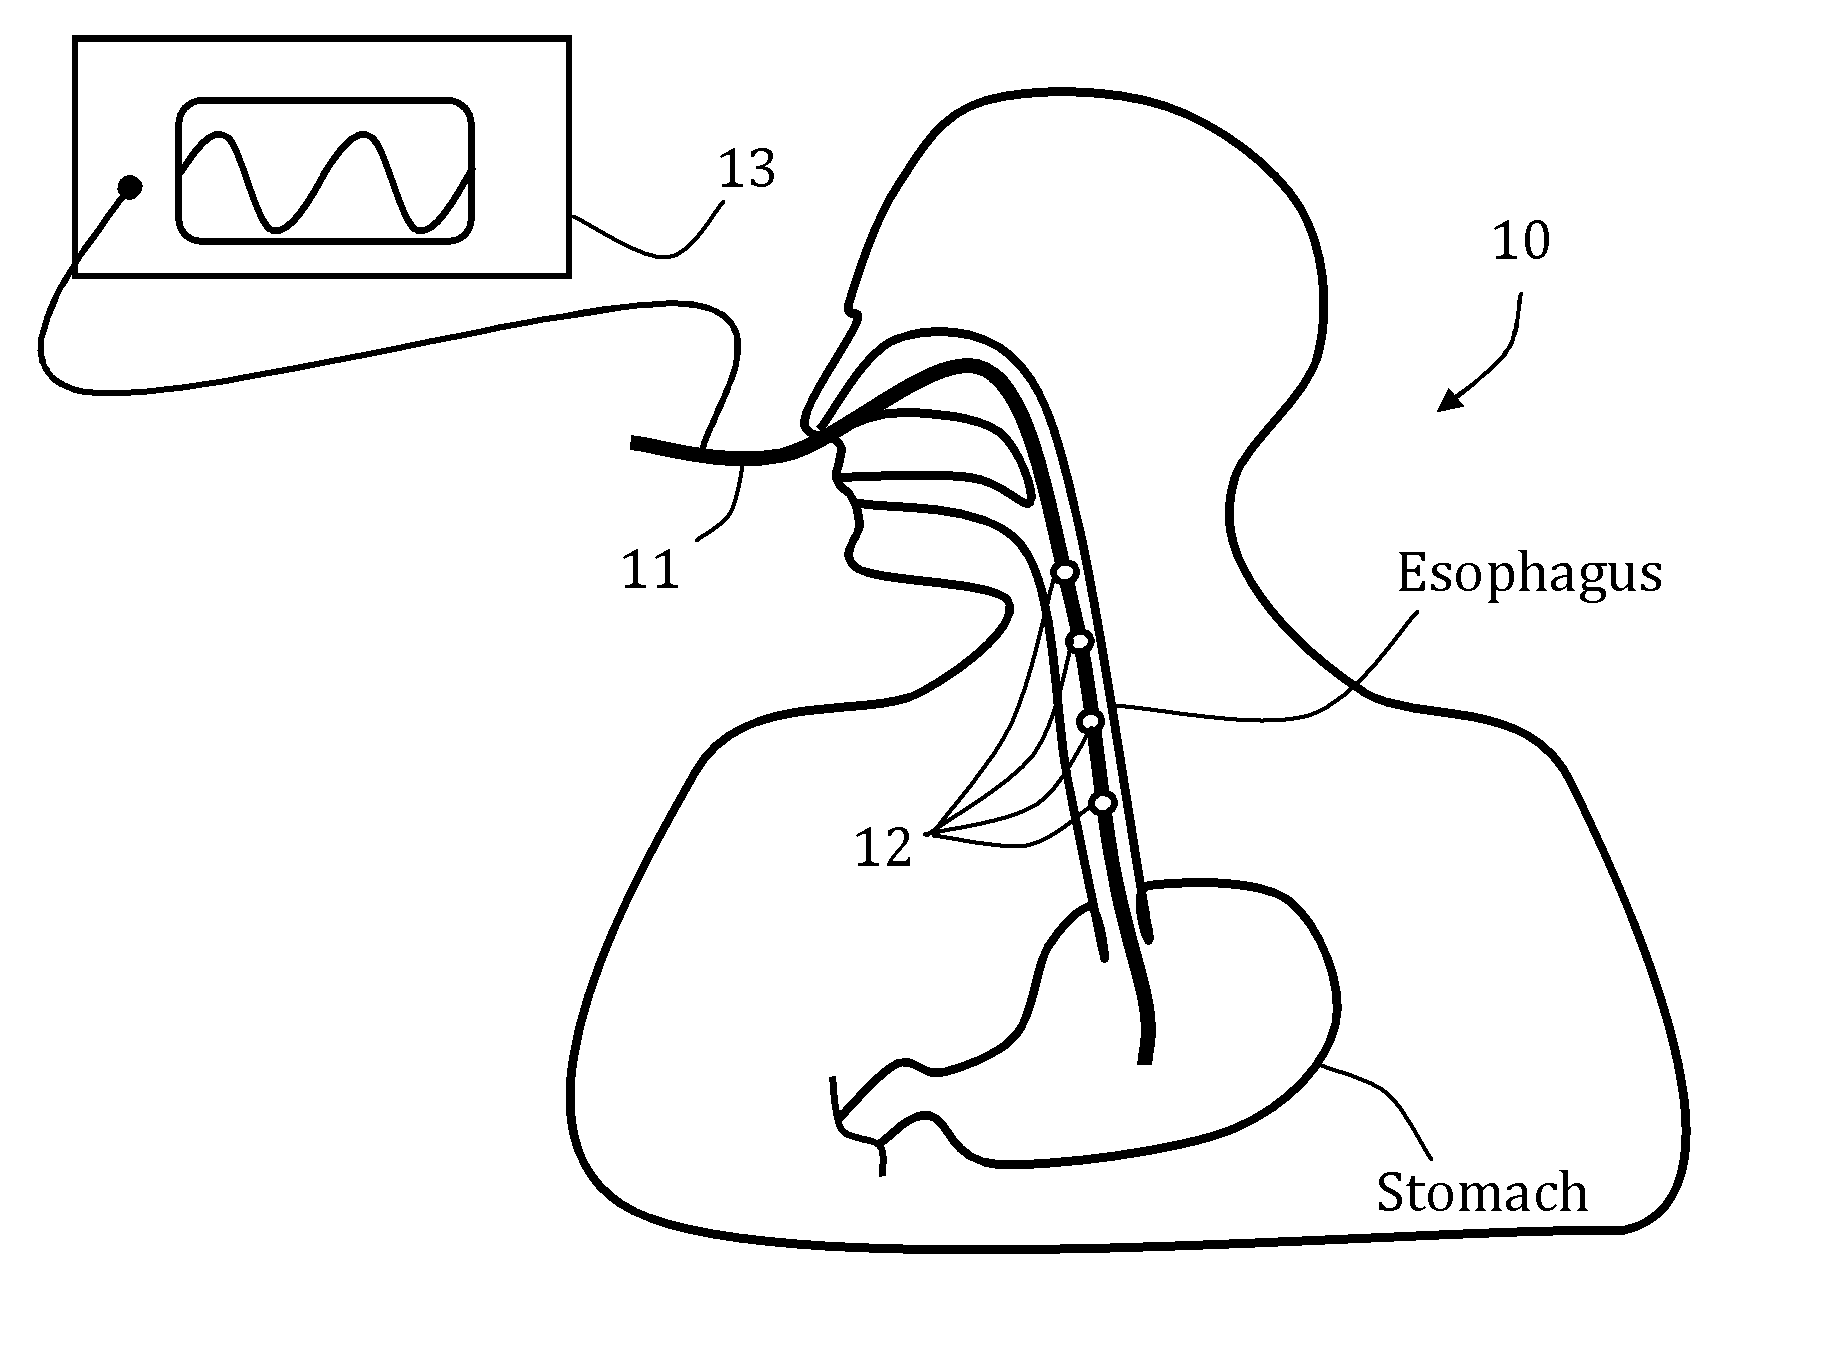 Gi tract stimulation devices and methods